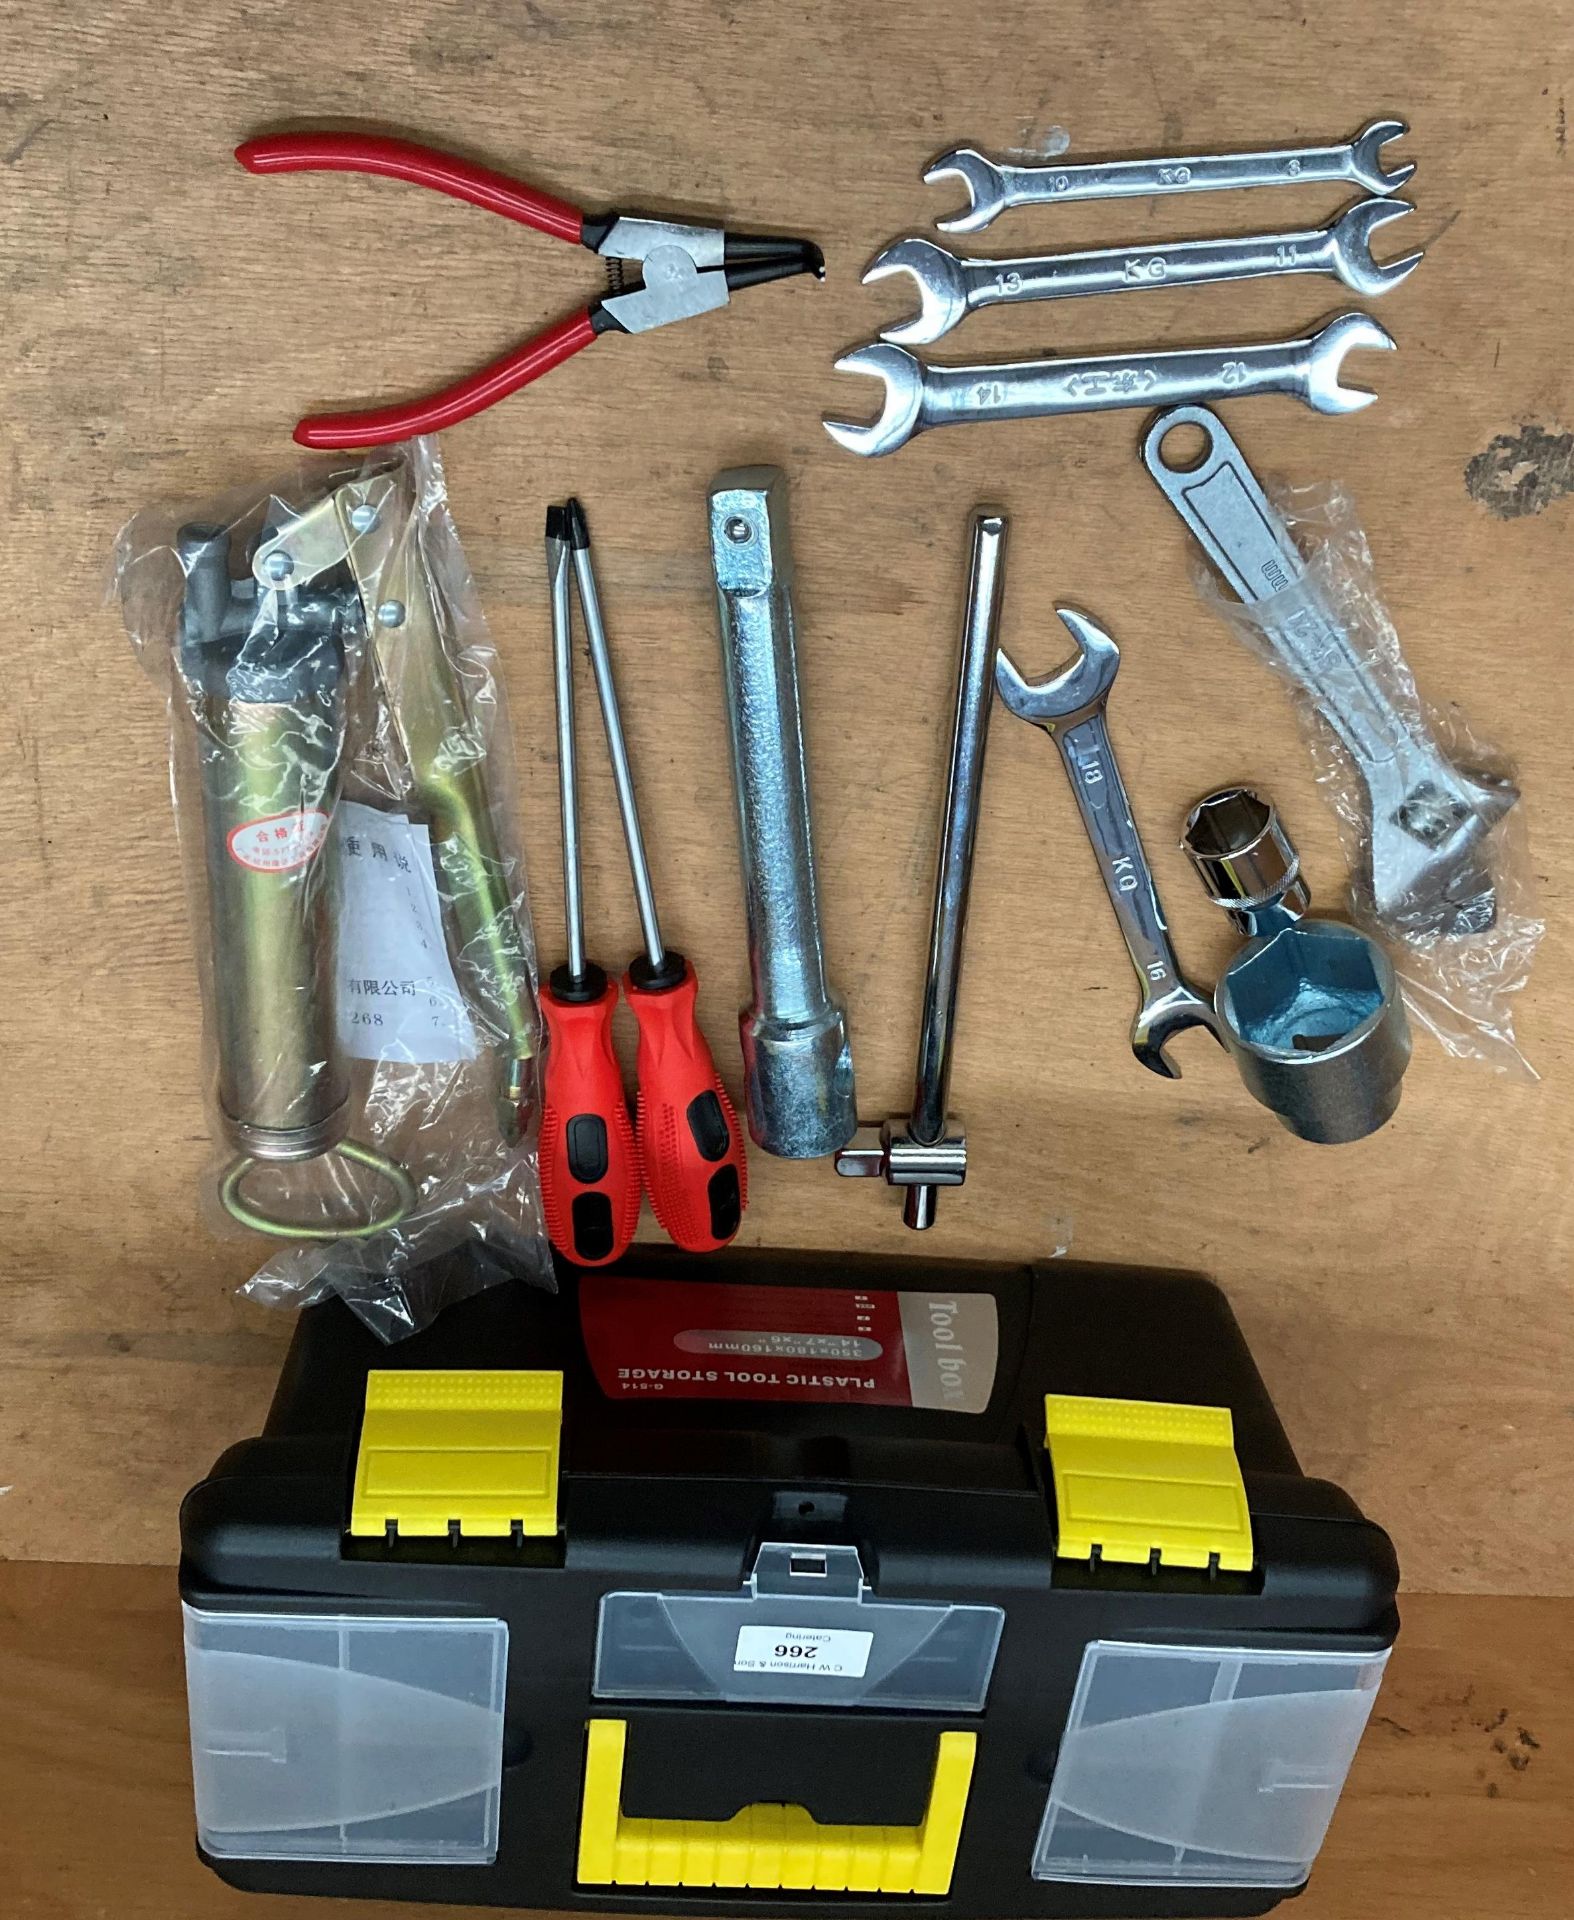 10 Plastic tool boxes 35cm x 18cm x 15cm containing tool kit comprising of a set of spanners, - Image 3 of 3